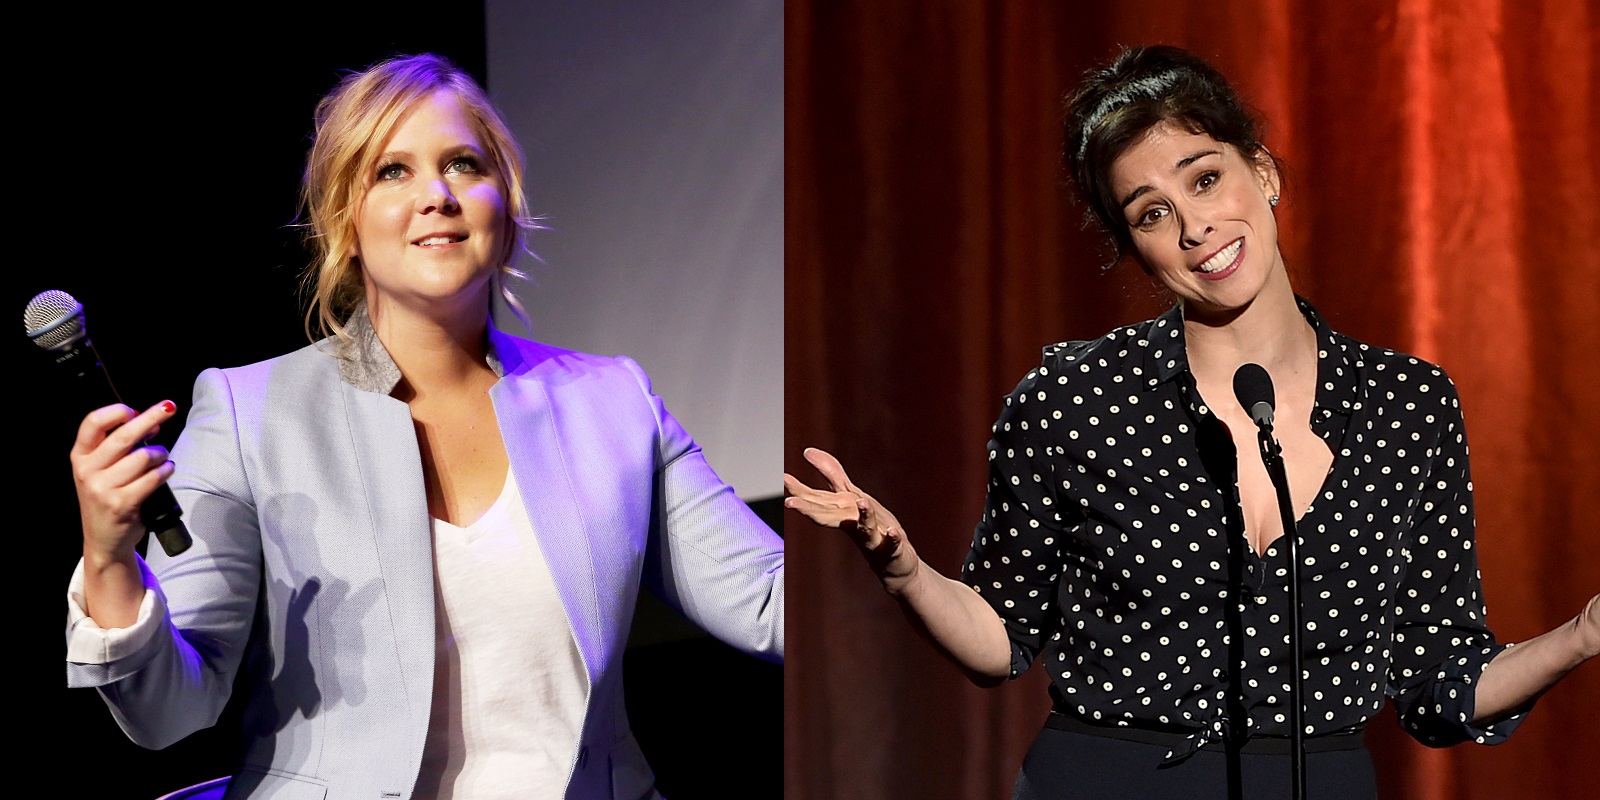 Amy Schumer and Sarah Silverman are under fire